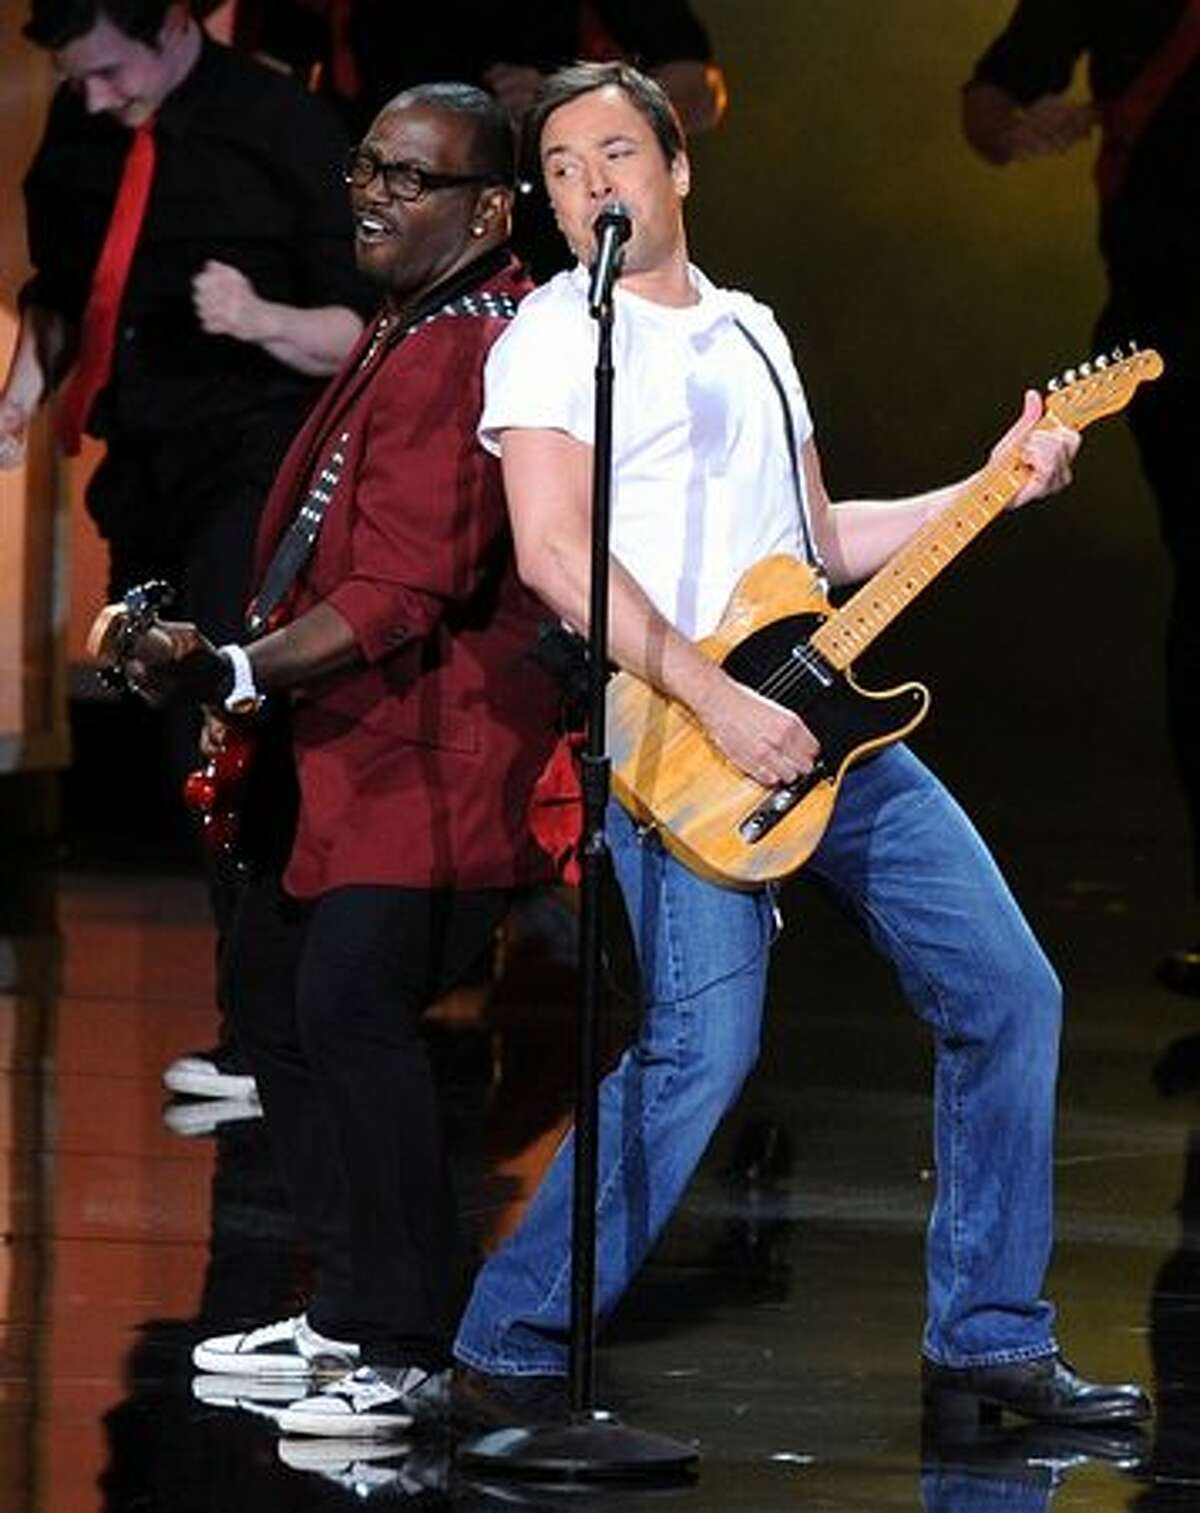 Musician Randy Jackson (L) and host Jimmy Fallon perform onstage.